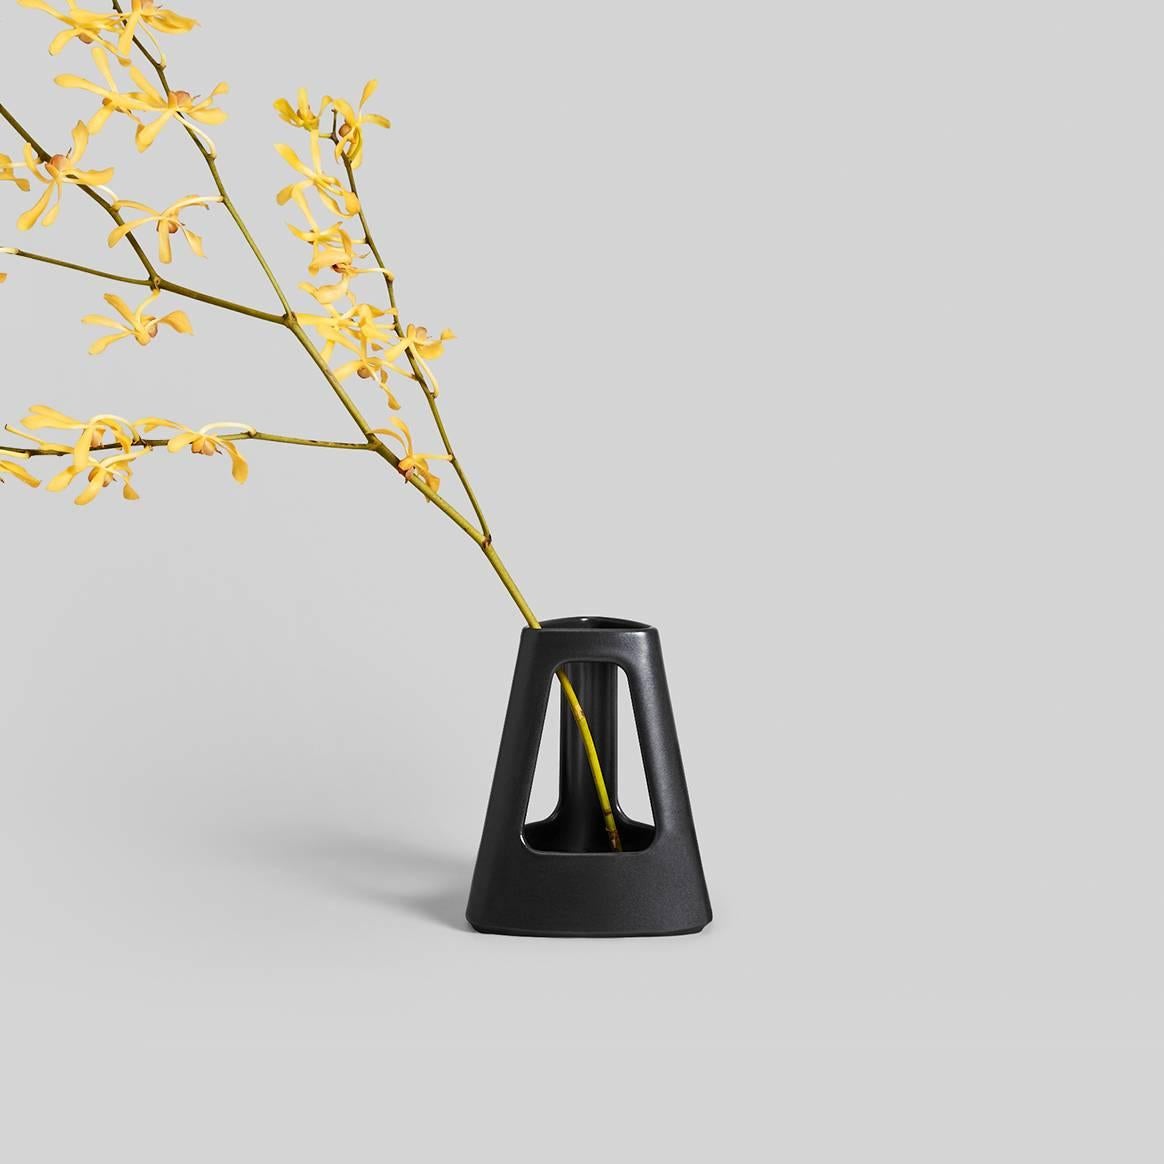 Concepted as an alternative to the traditionally heavy vase, Flora’s lightweight shape beautifully displays any bouquet. From large arrangements to a single stem, it acts as a frame; a balanced environment where blossoms can take center stage and